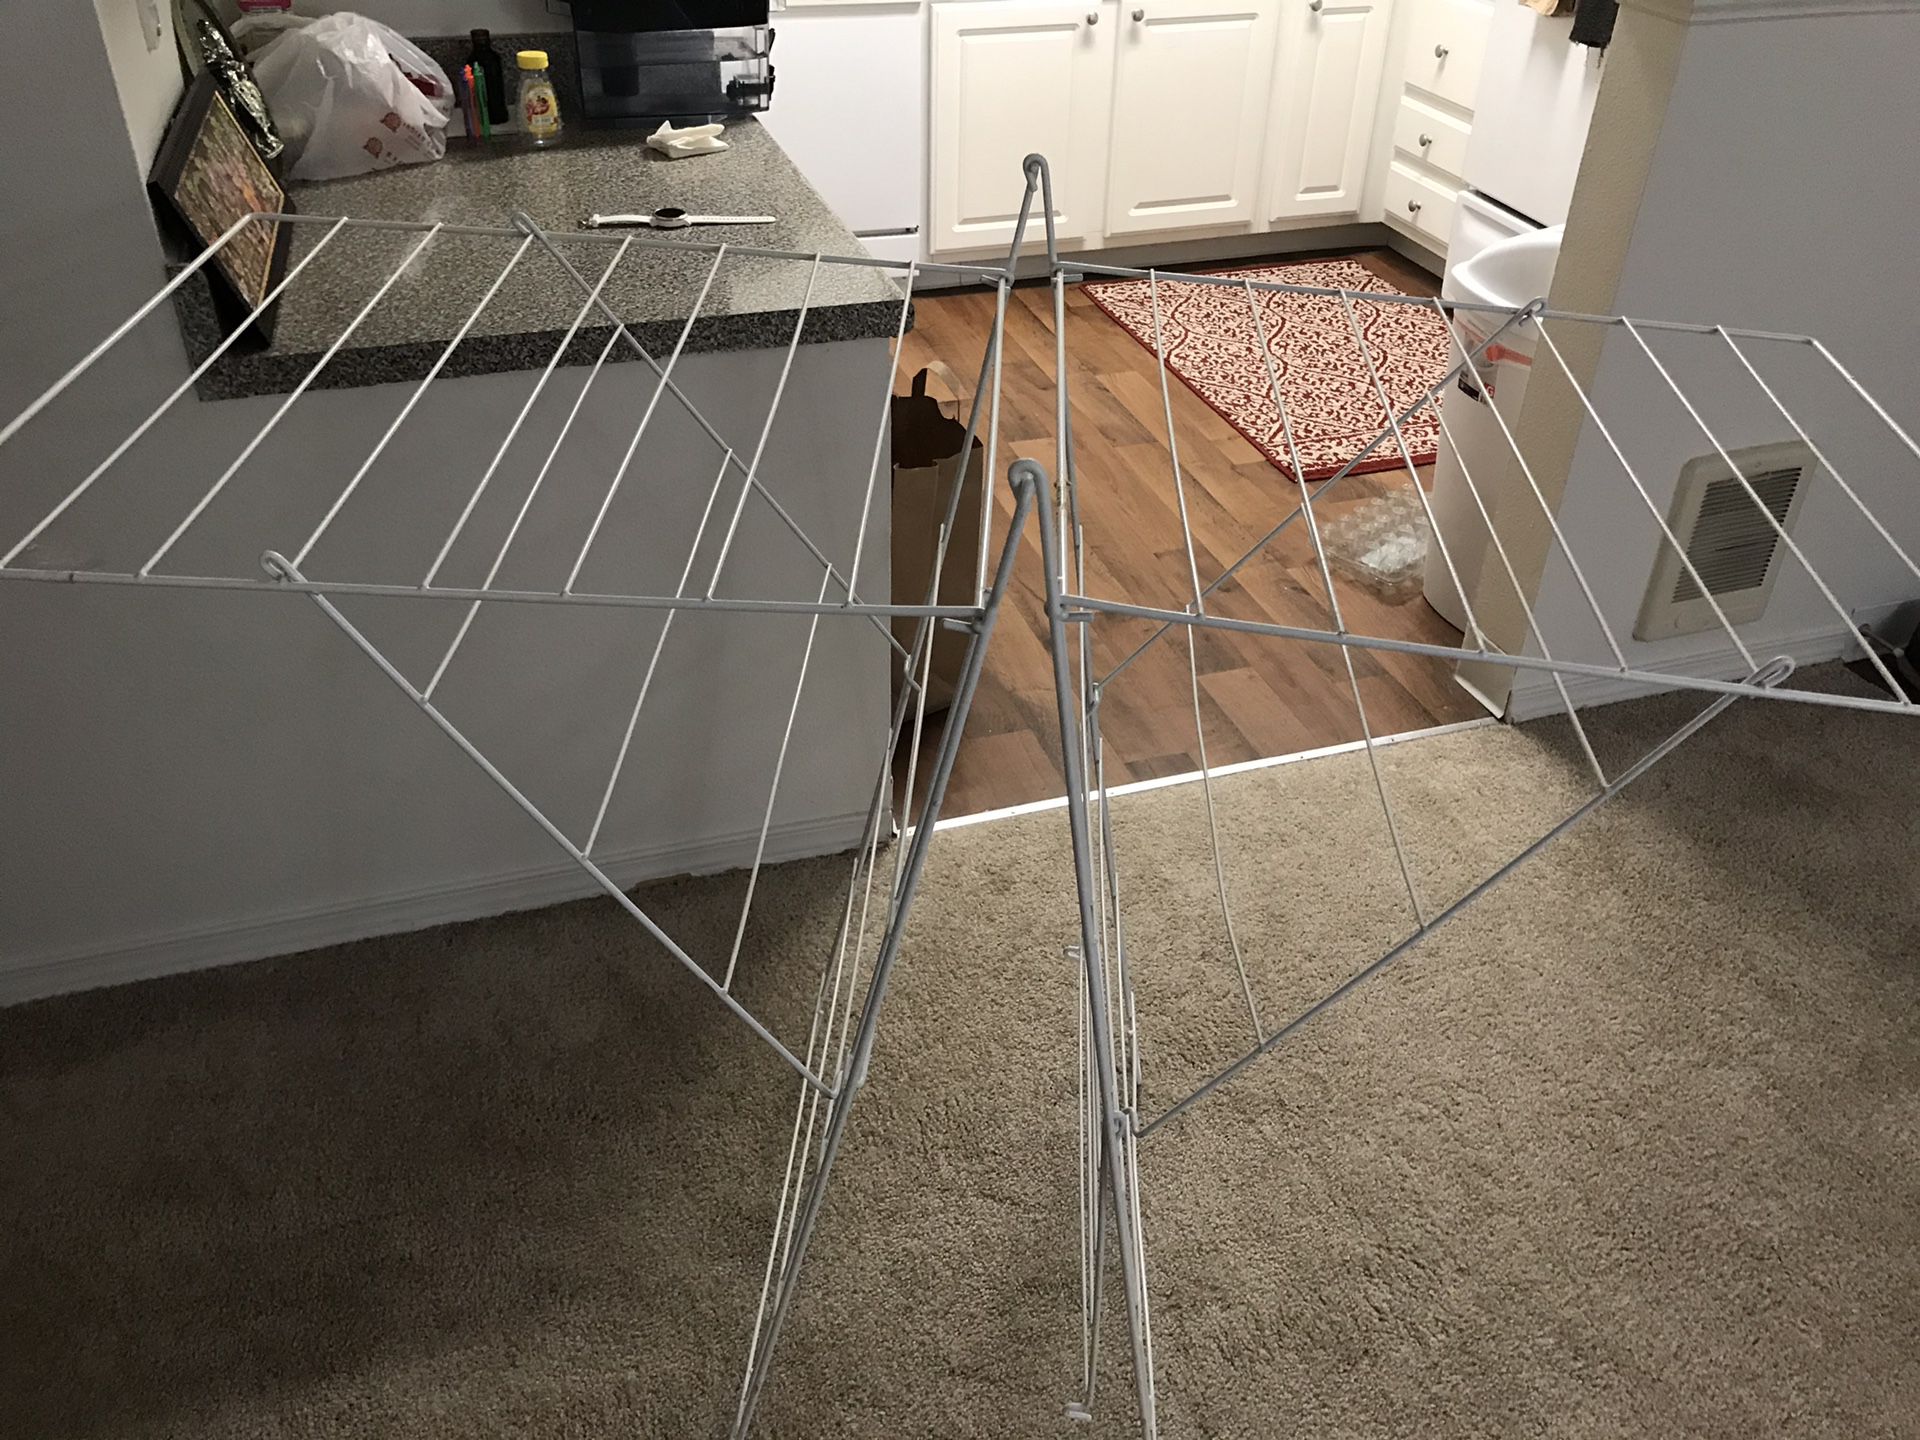 Expandable clothes drying rack